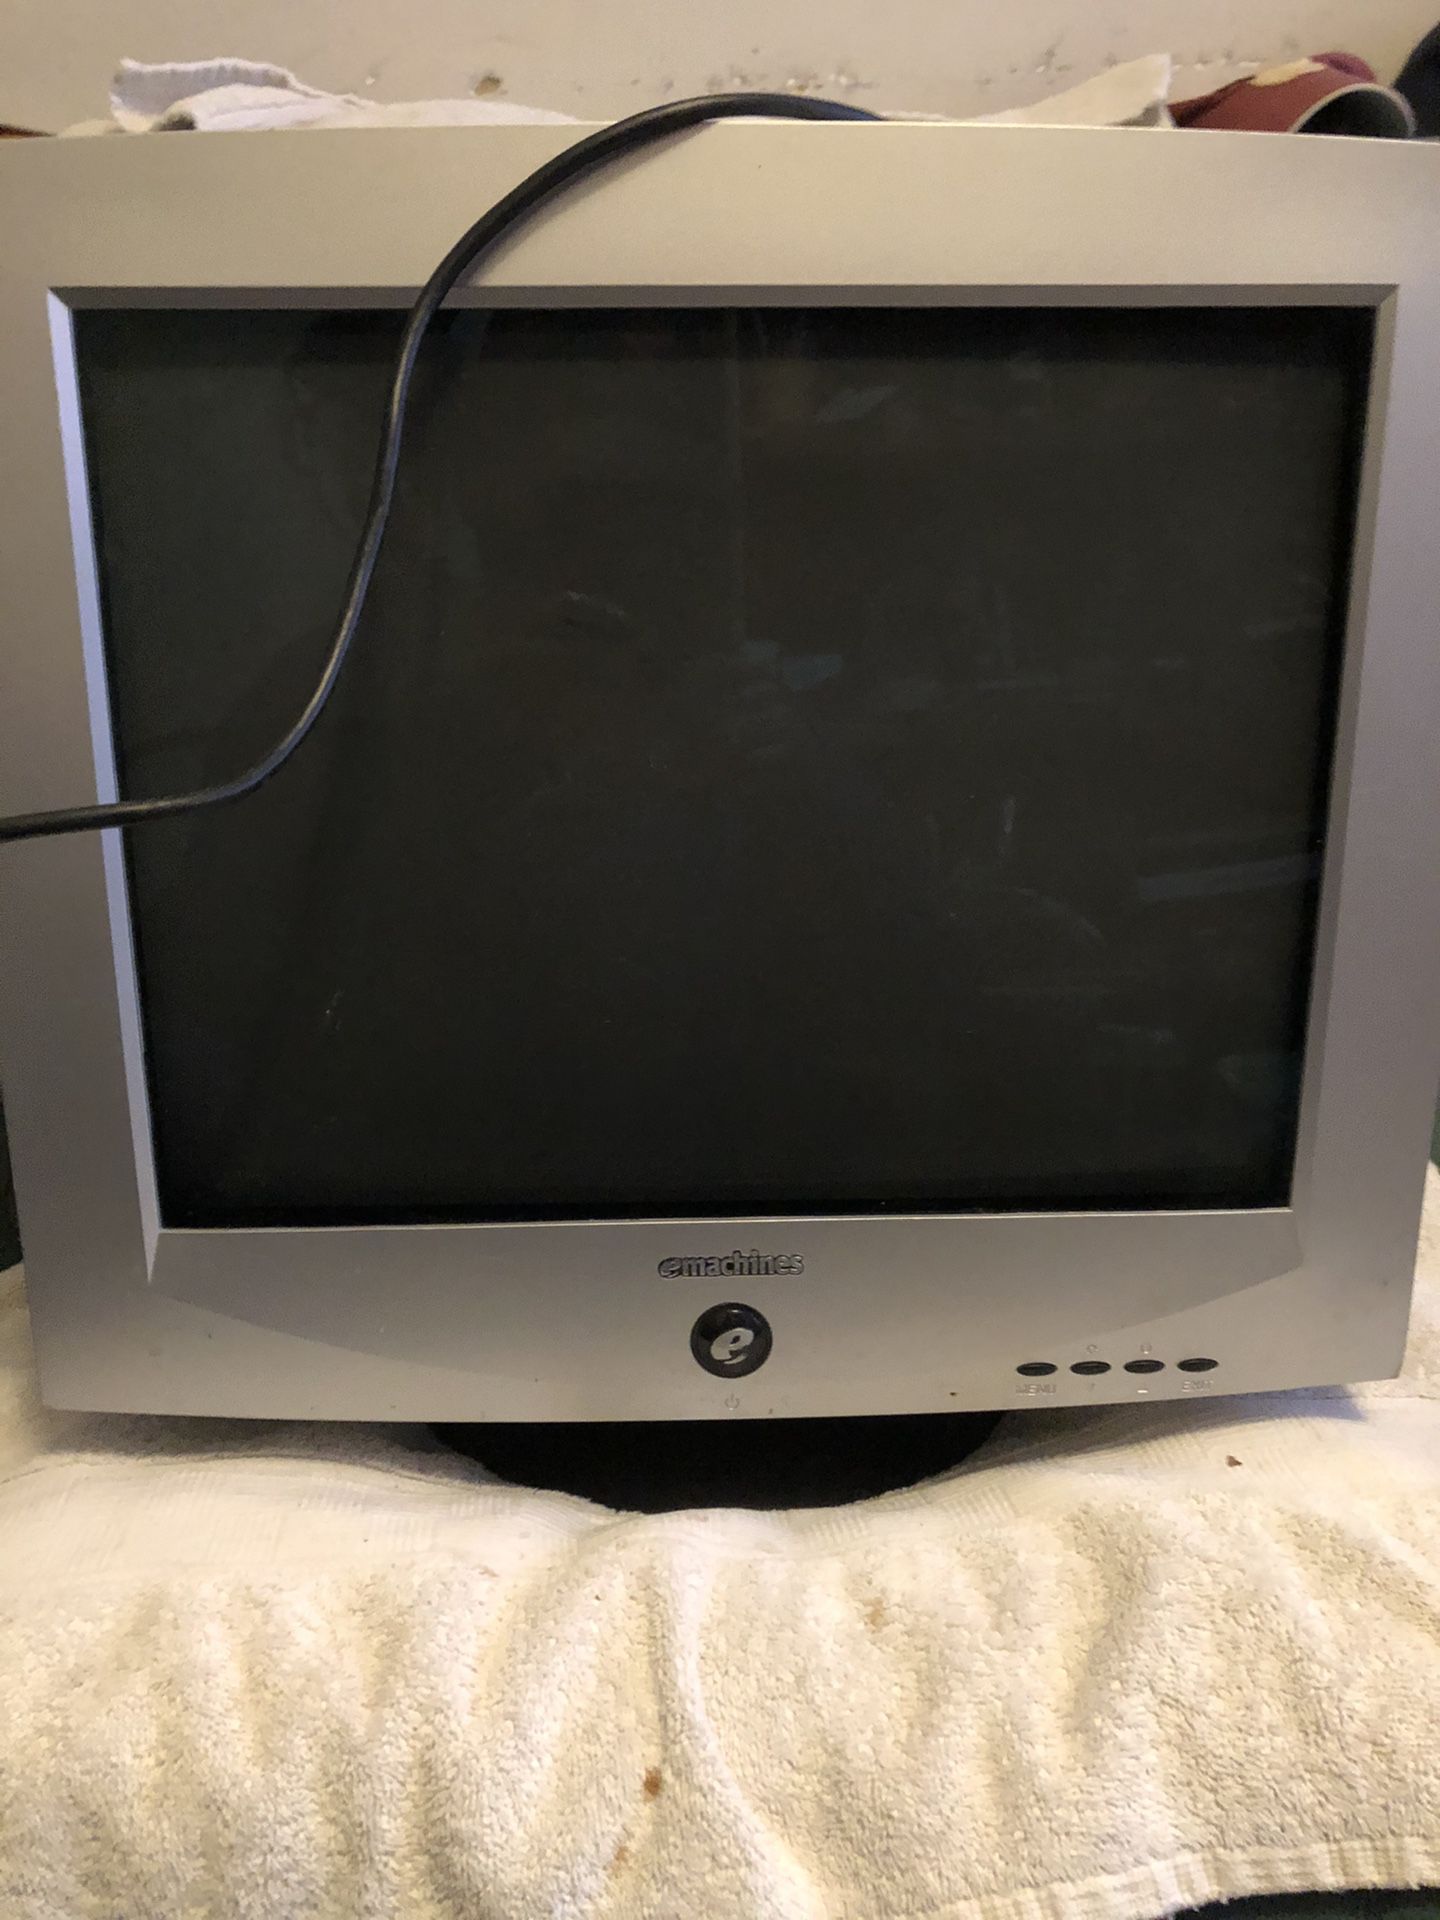 Vintage Gaming eMachines eView 17f3 VGA CRT Computer Monitor